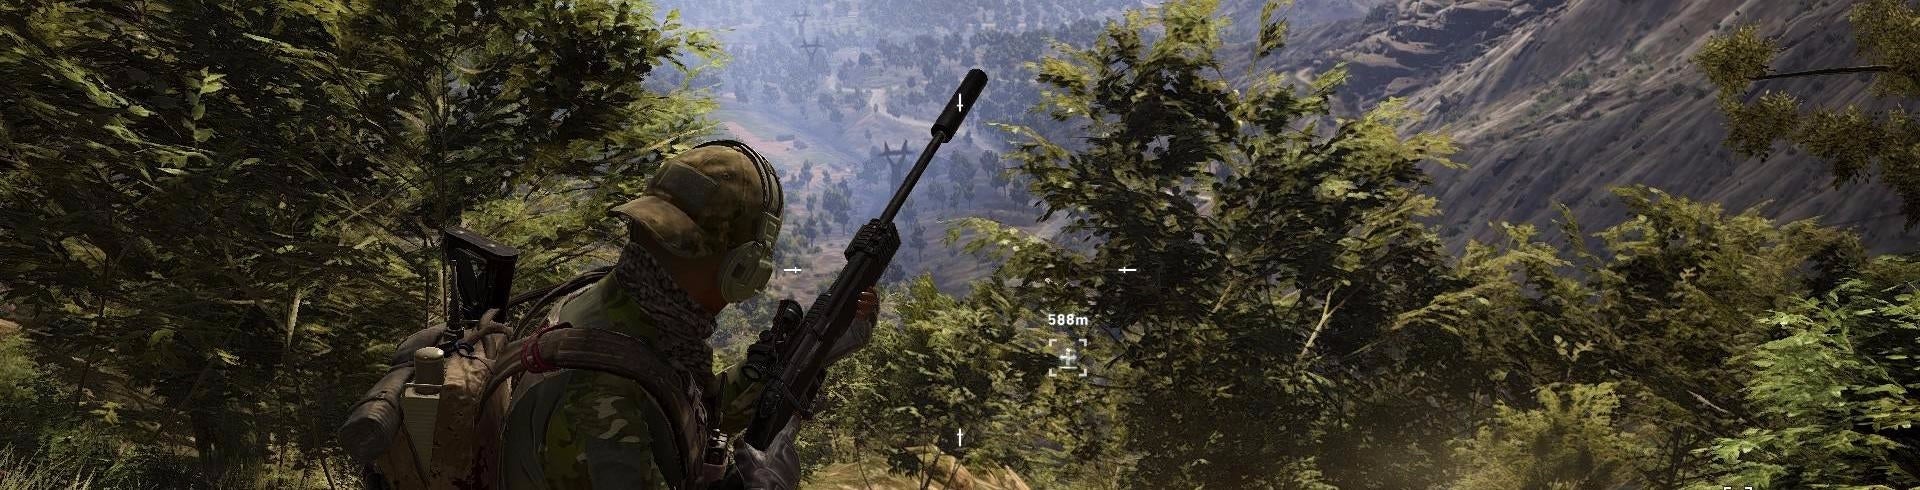 Image for Tom Clancy's Ghost Recon: Wildlands review